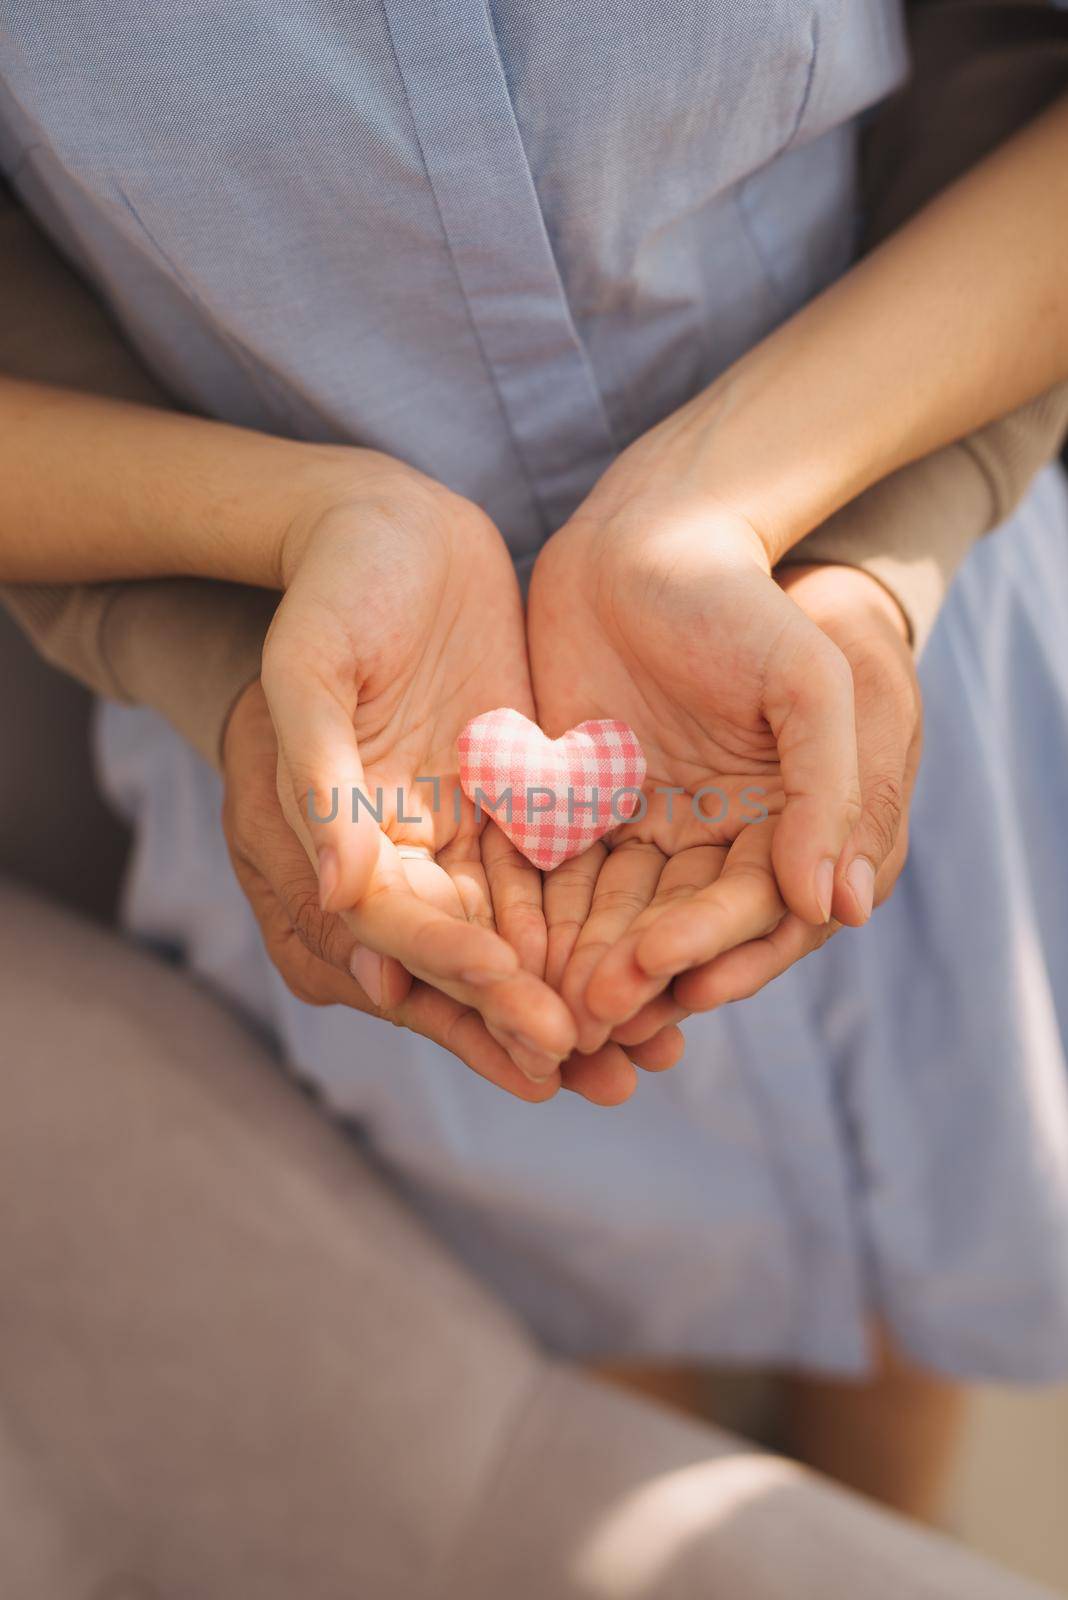 Couple in love. Man and woman hand holding heart shape.